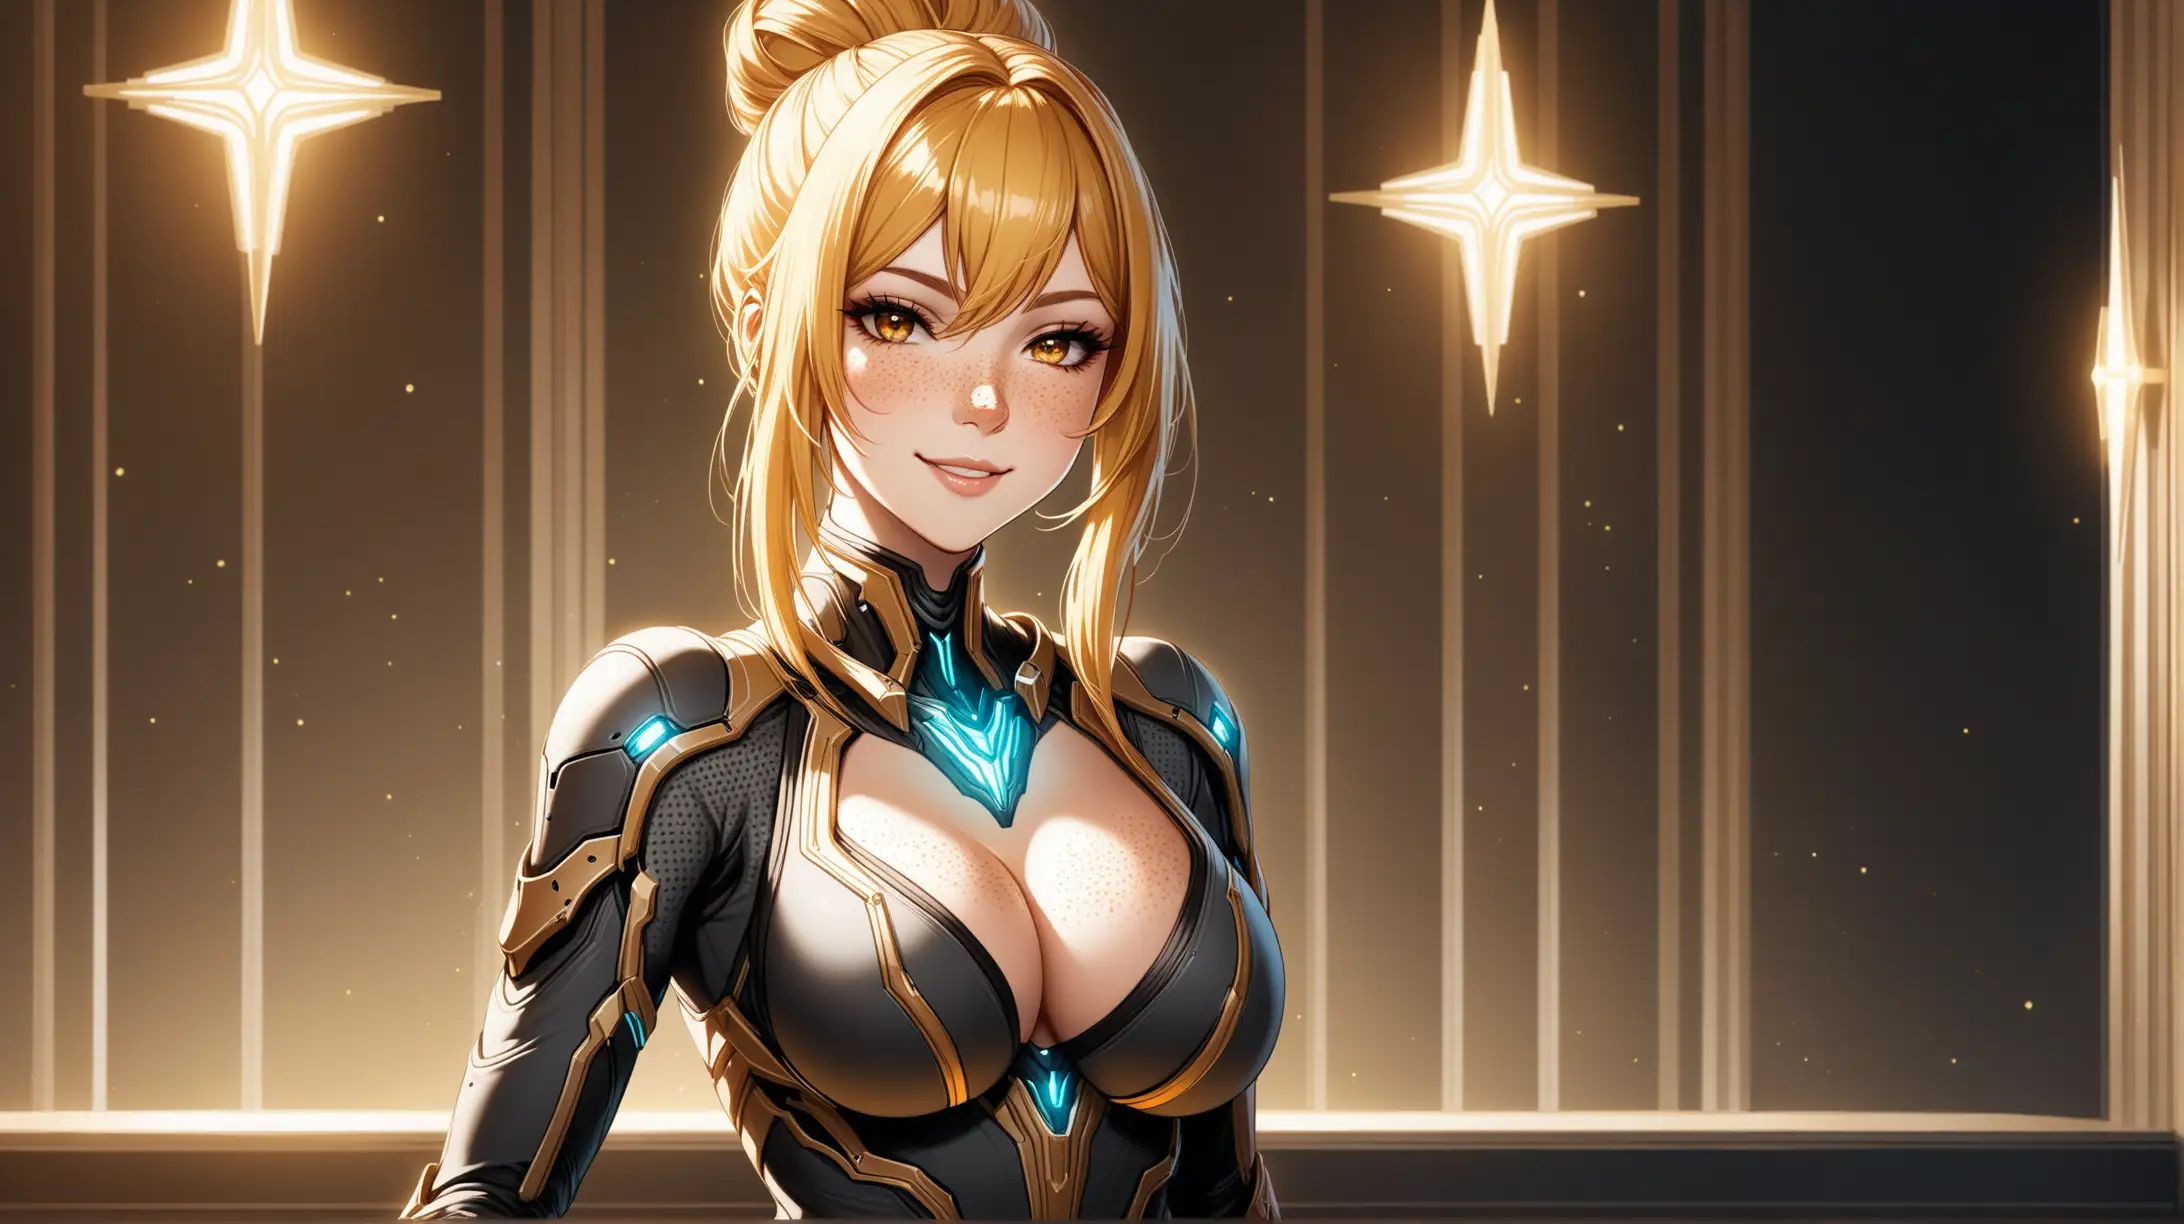 Blonde Woman in WarframeInspired Outfit Seductive Indoor Portrait with Natural Lighting